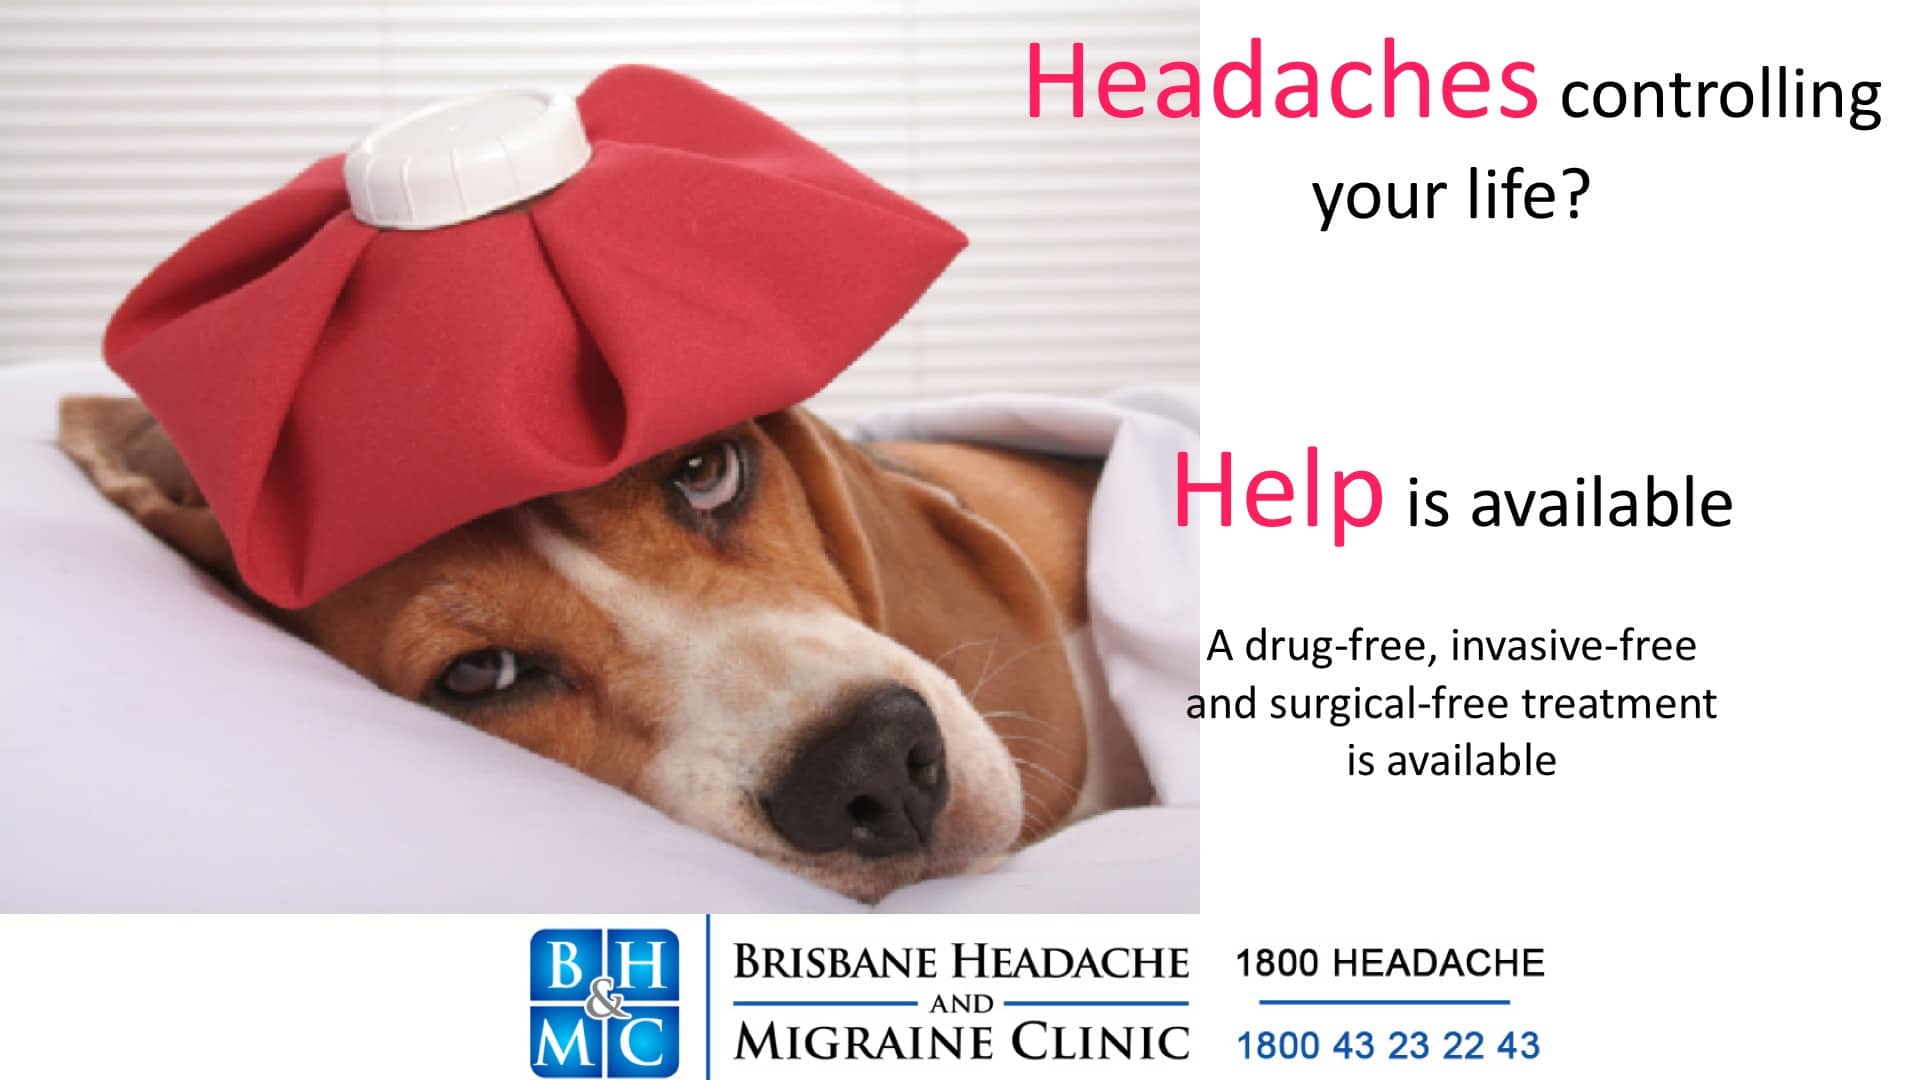 Drug-free, non-invasive treatment is available for migraine and headache sufferers